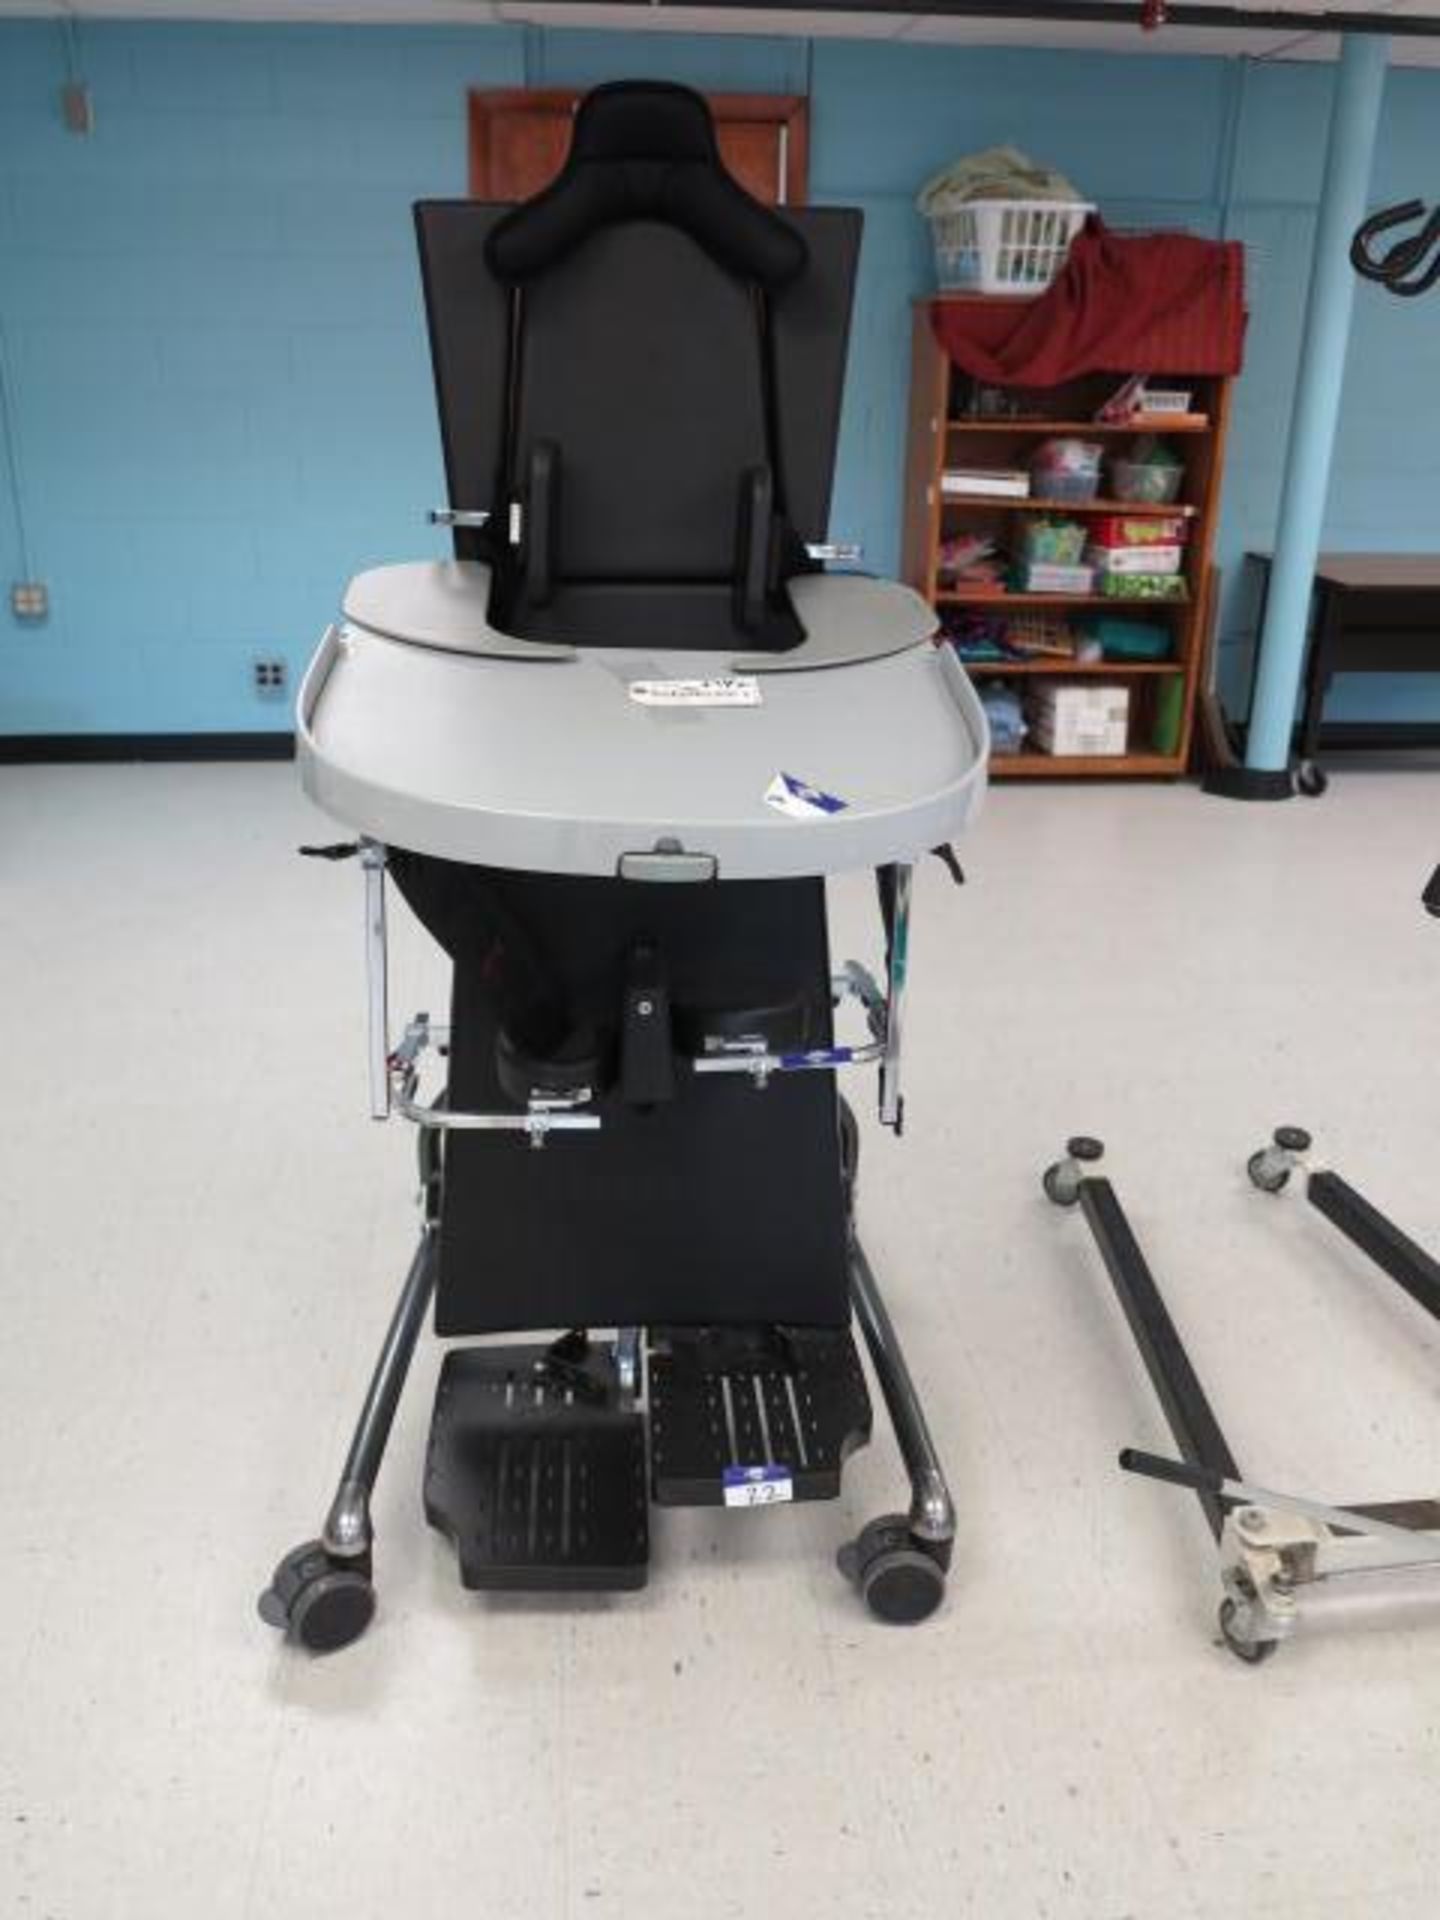 R82 Adaptive Chair Max Load 100Kg Located in PT Room